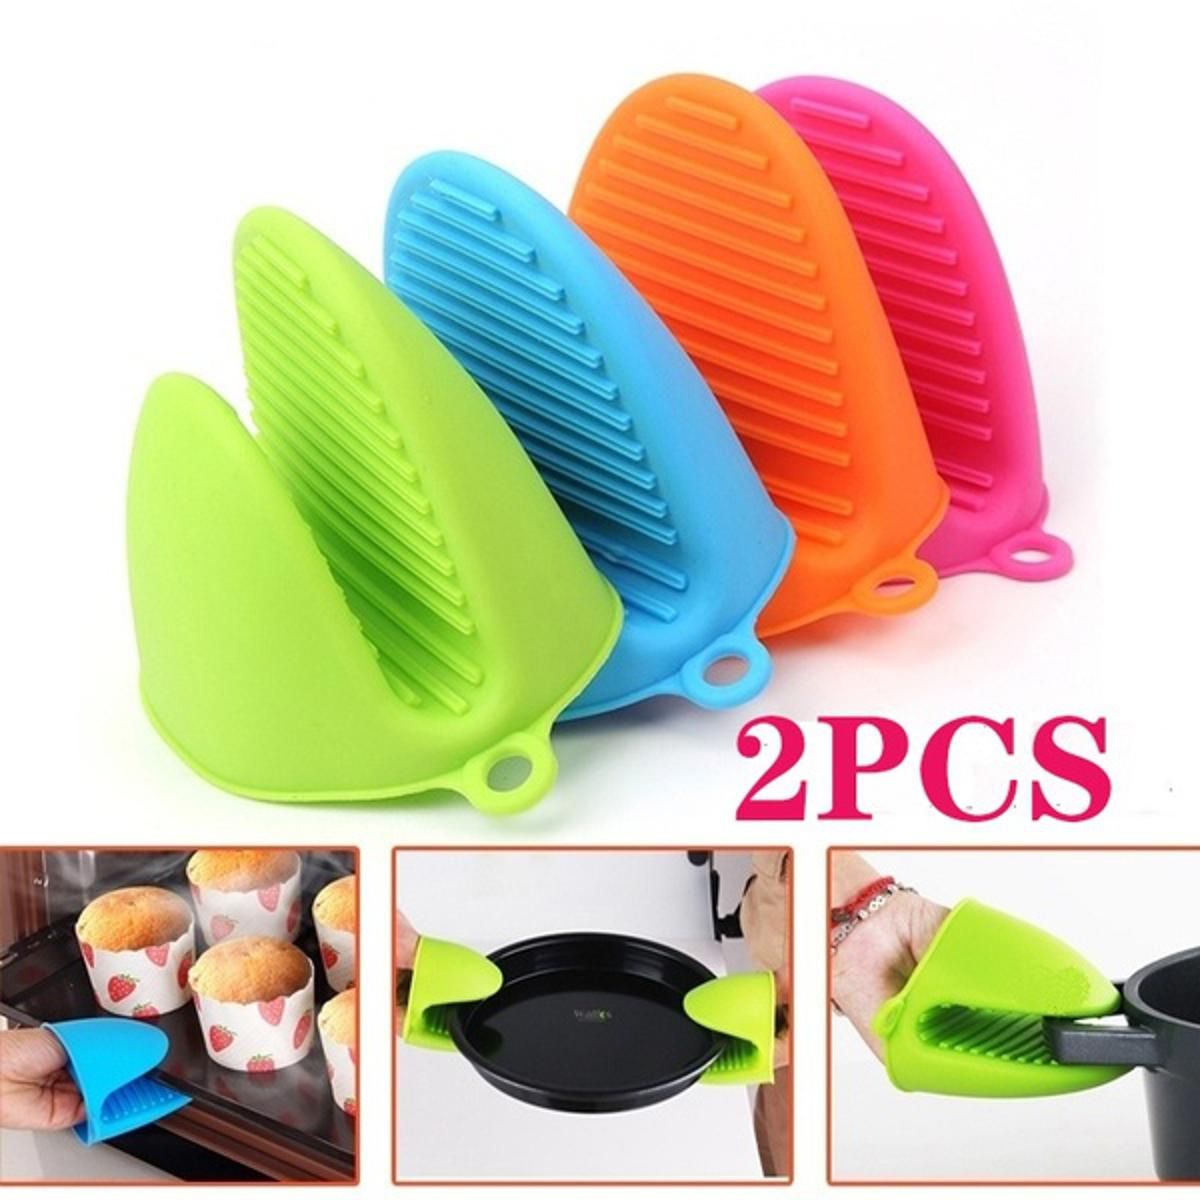 https://www.oshi.pk/images/variation/2-pcs-silicon-pot-holder---heat-resistant-gloves--kitchen-accessories-anti-slip-baking-mitts--silicon-hot-pot-holders--best-kitchen-tool-21968-157.jpg